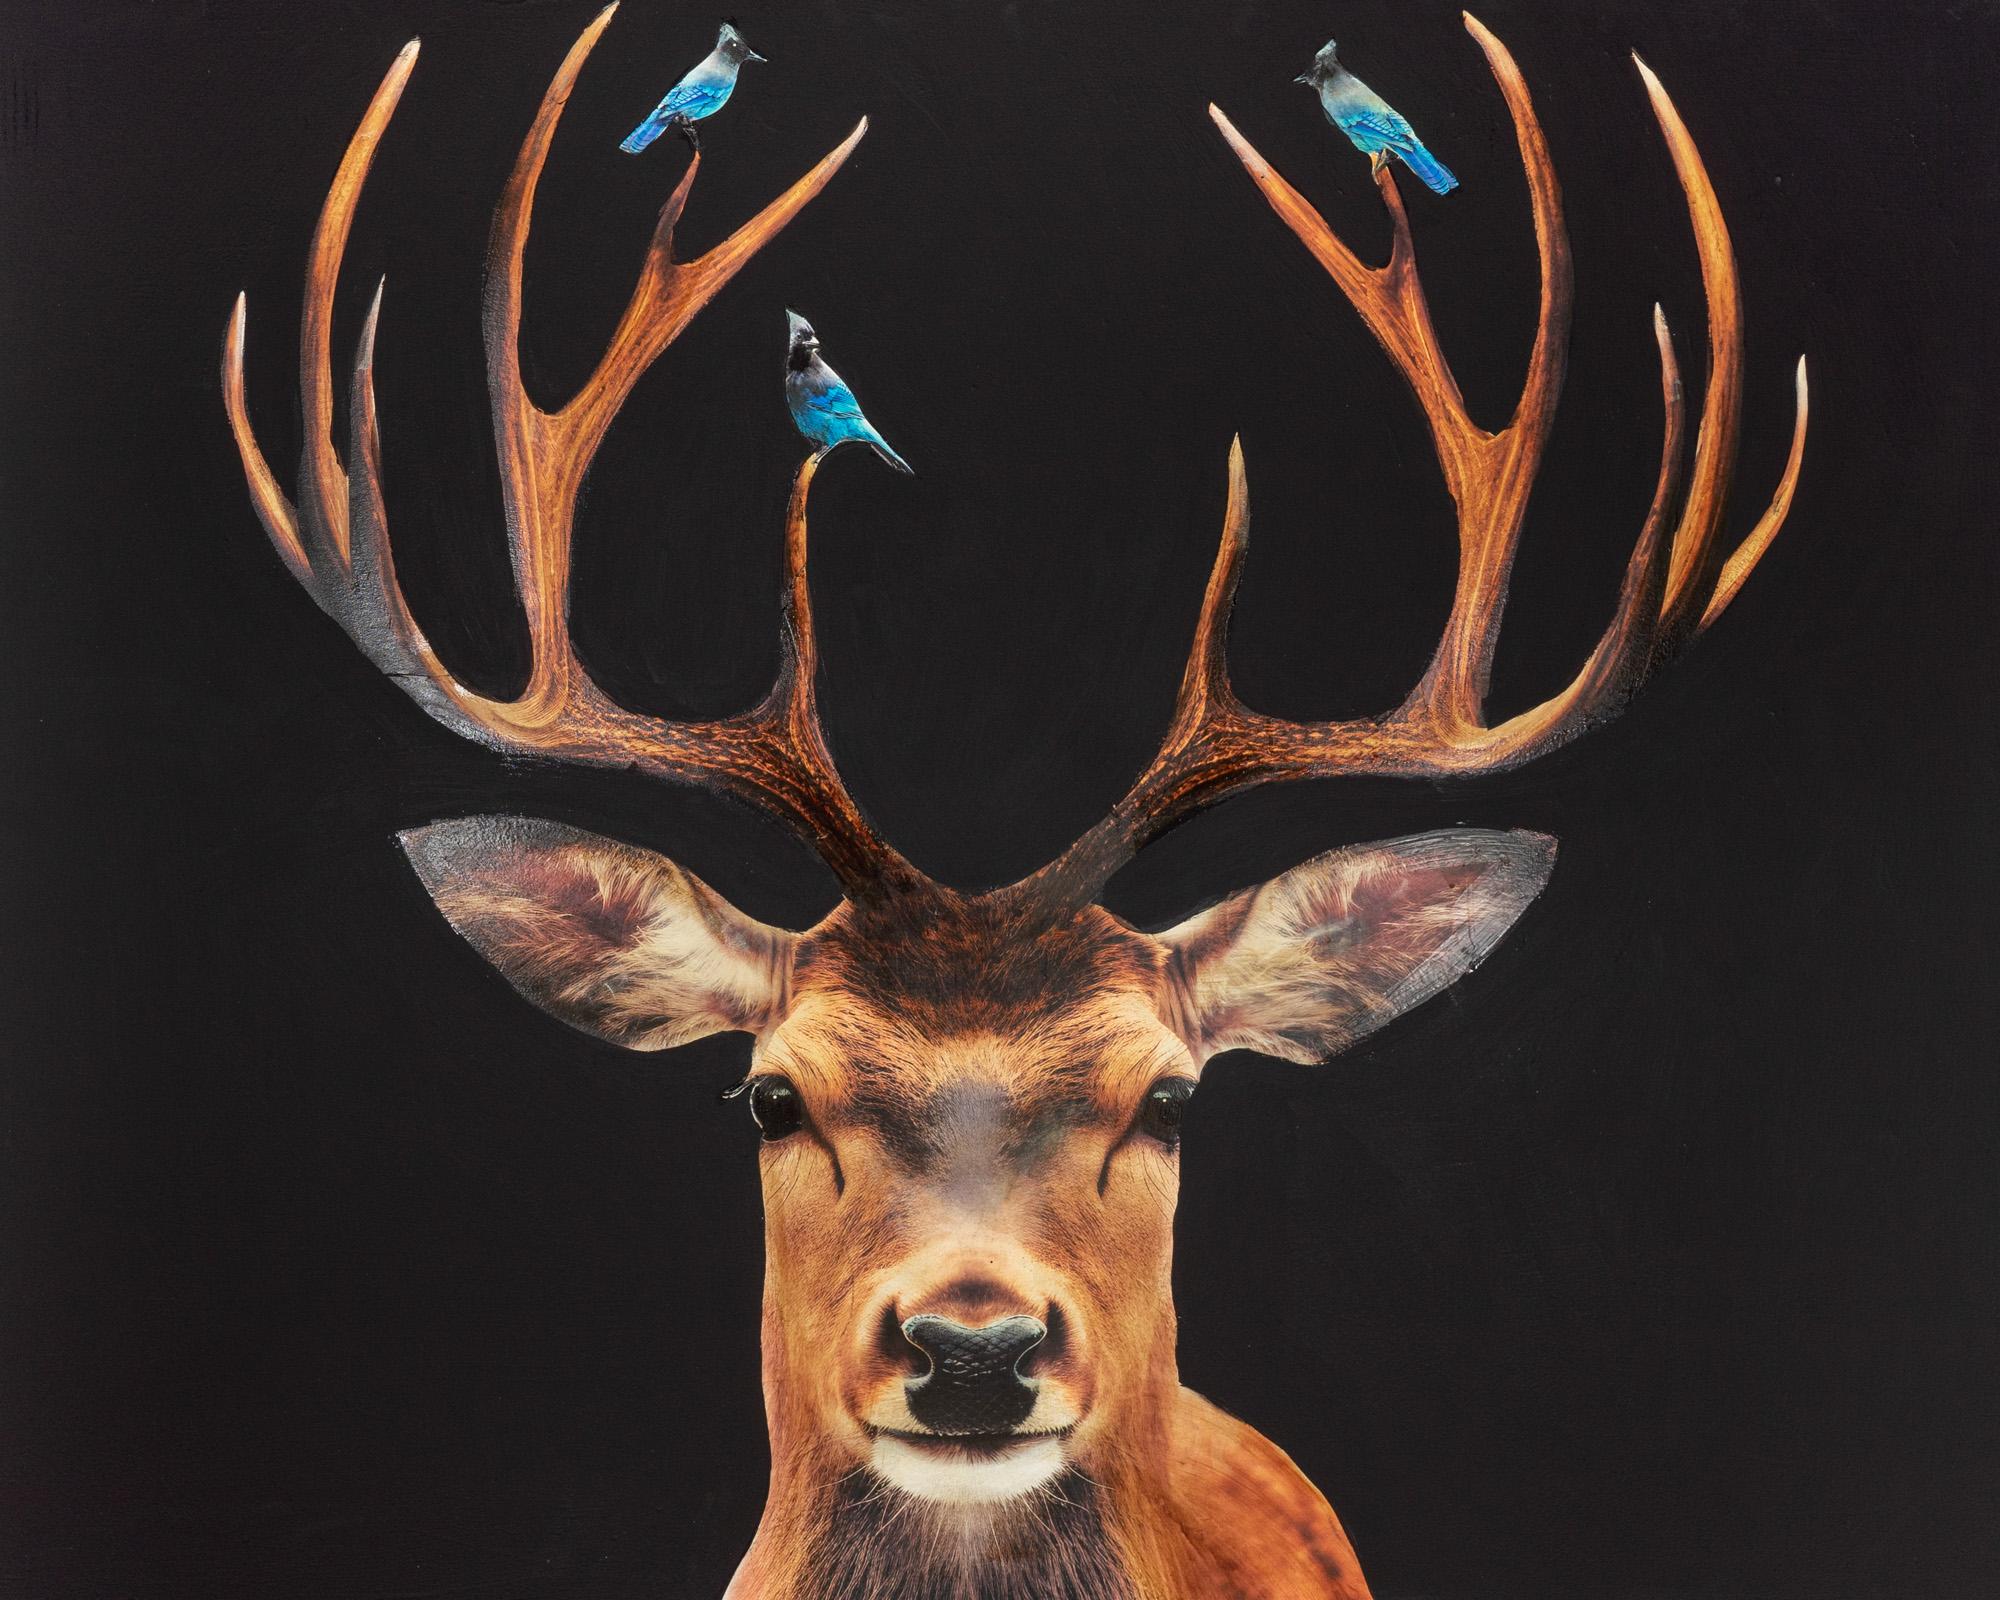 Anke Schofield Figurative Painting - "Blue Birds" Contemporary Deer and Birds Collage Mixed Media on Panel 